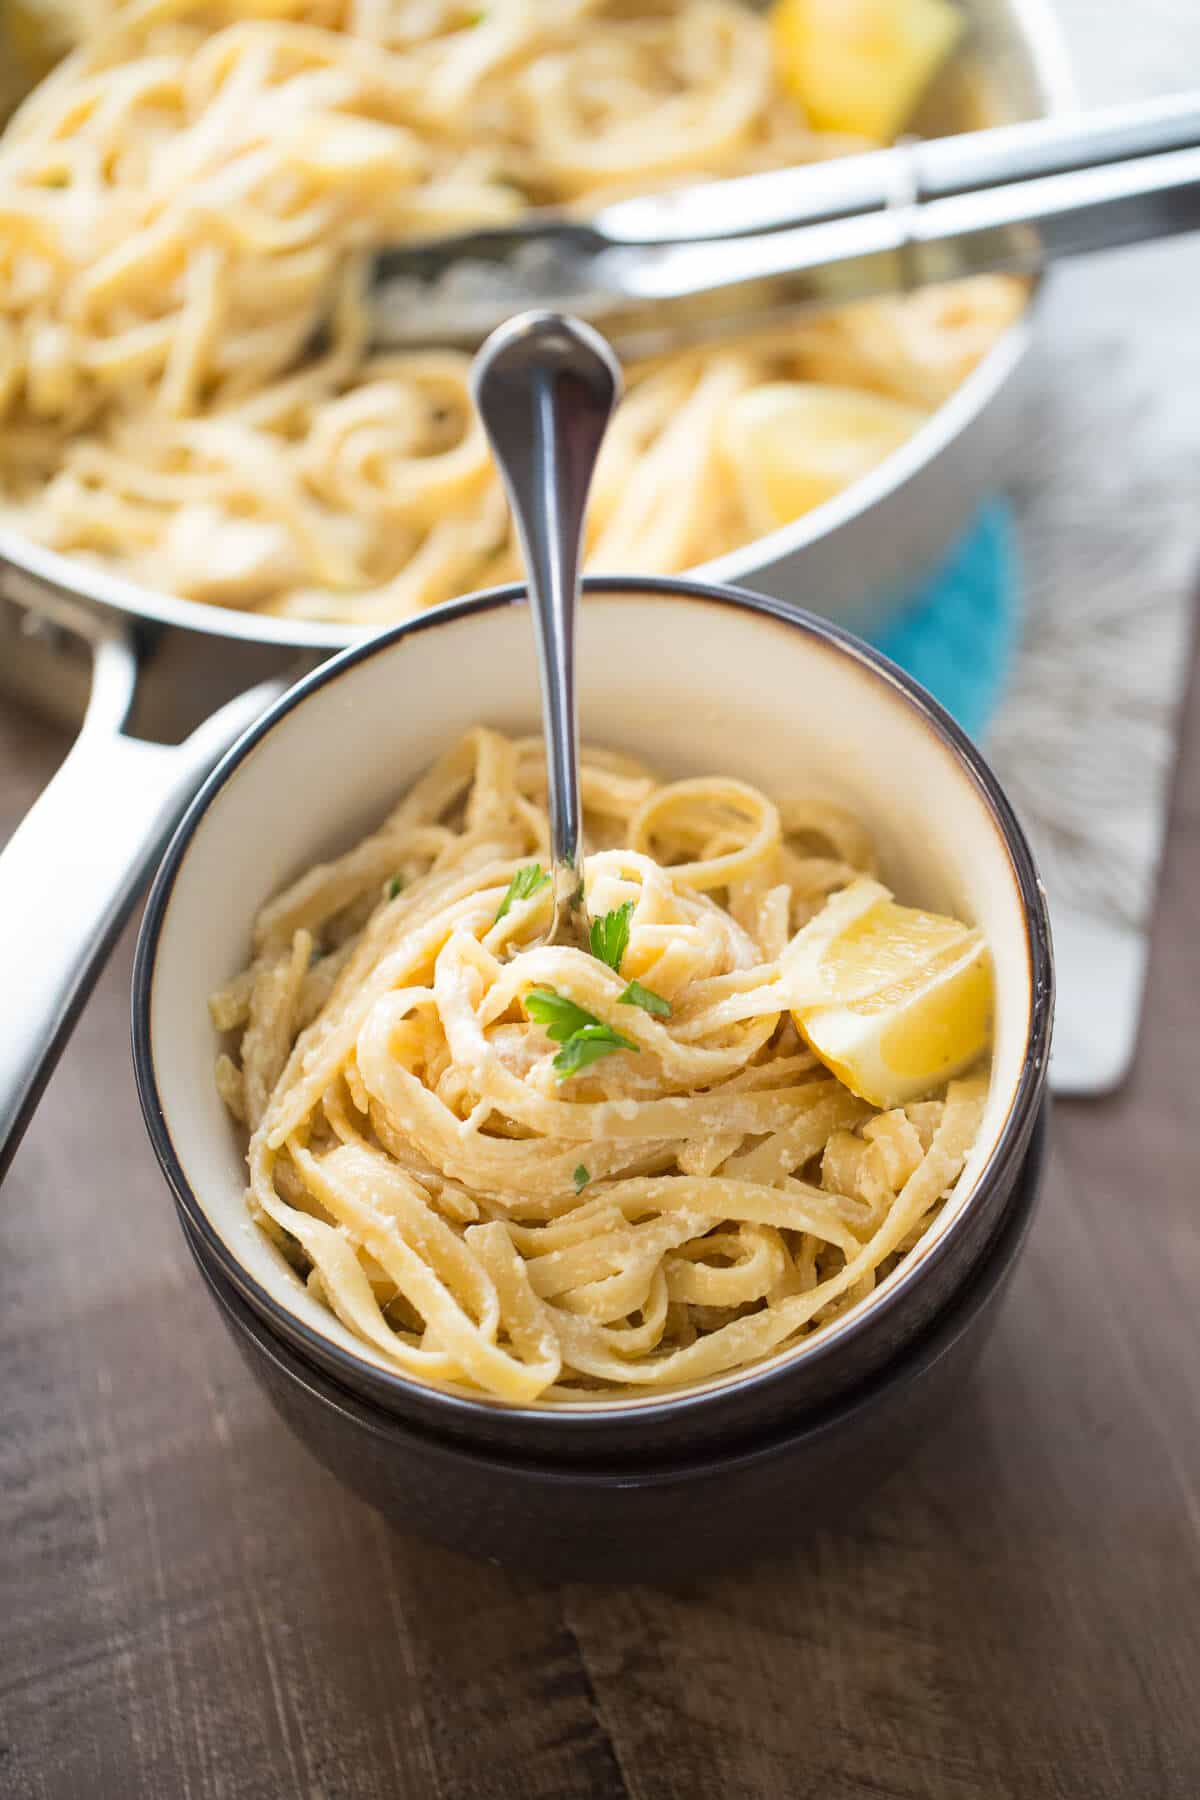 An easy Fettuccine Alfredo recipe that is perfect for those days you want a pick me up! The sauce is so light and simple, you are going to love it!